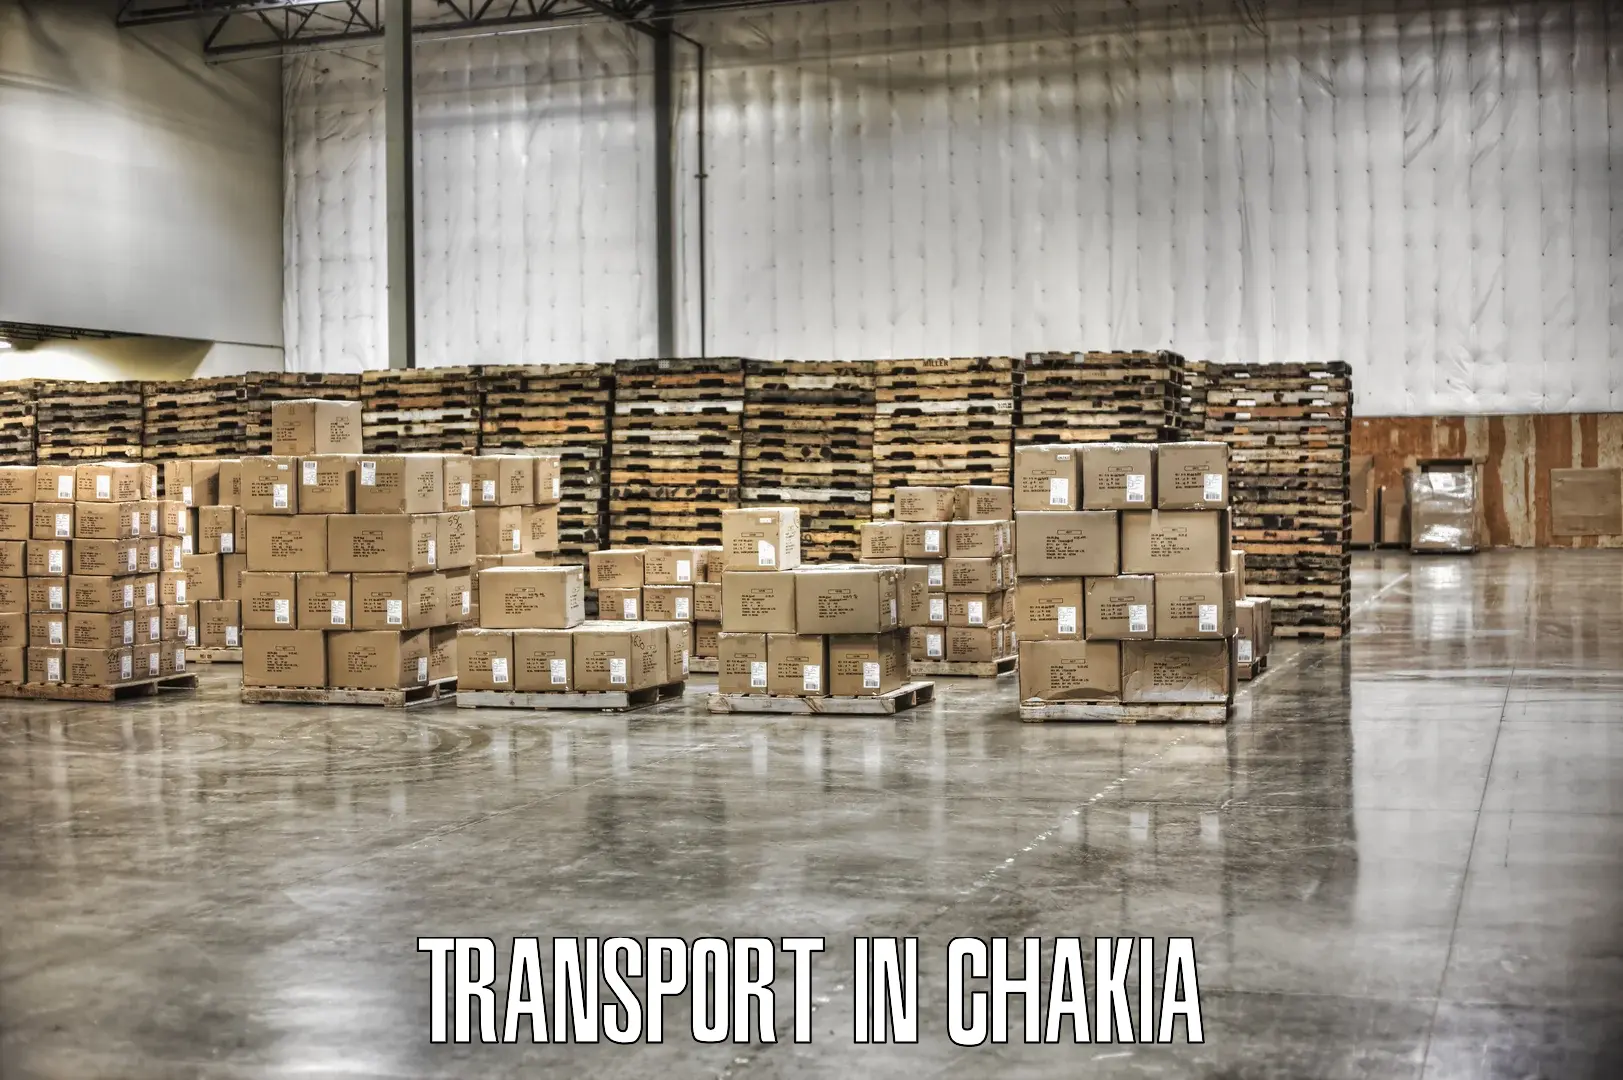 Commercial transport service in Chakia